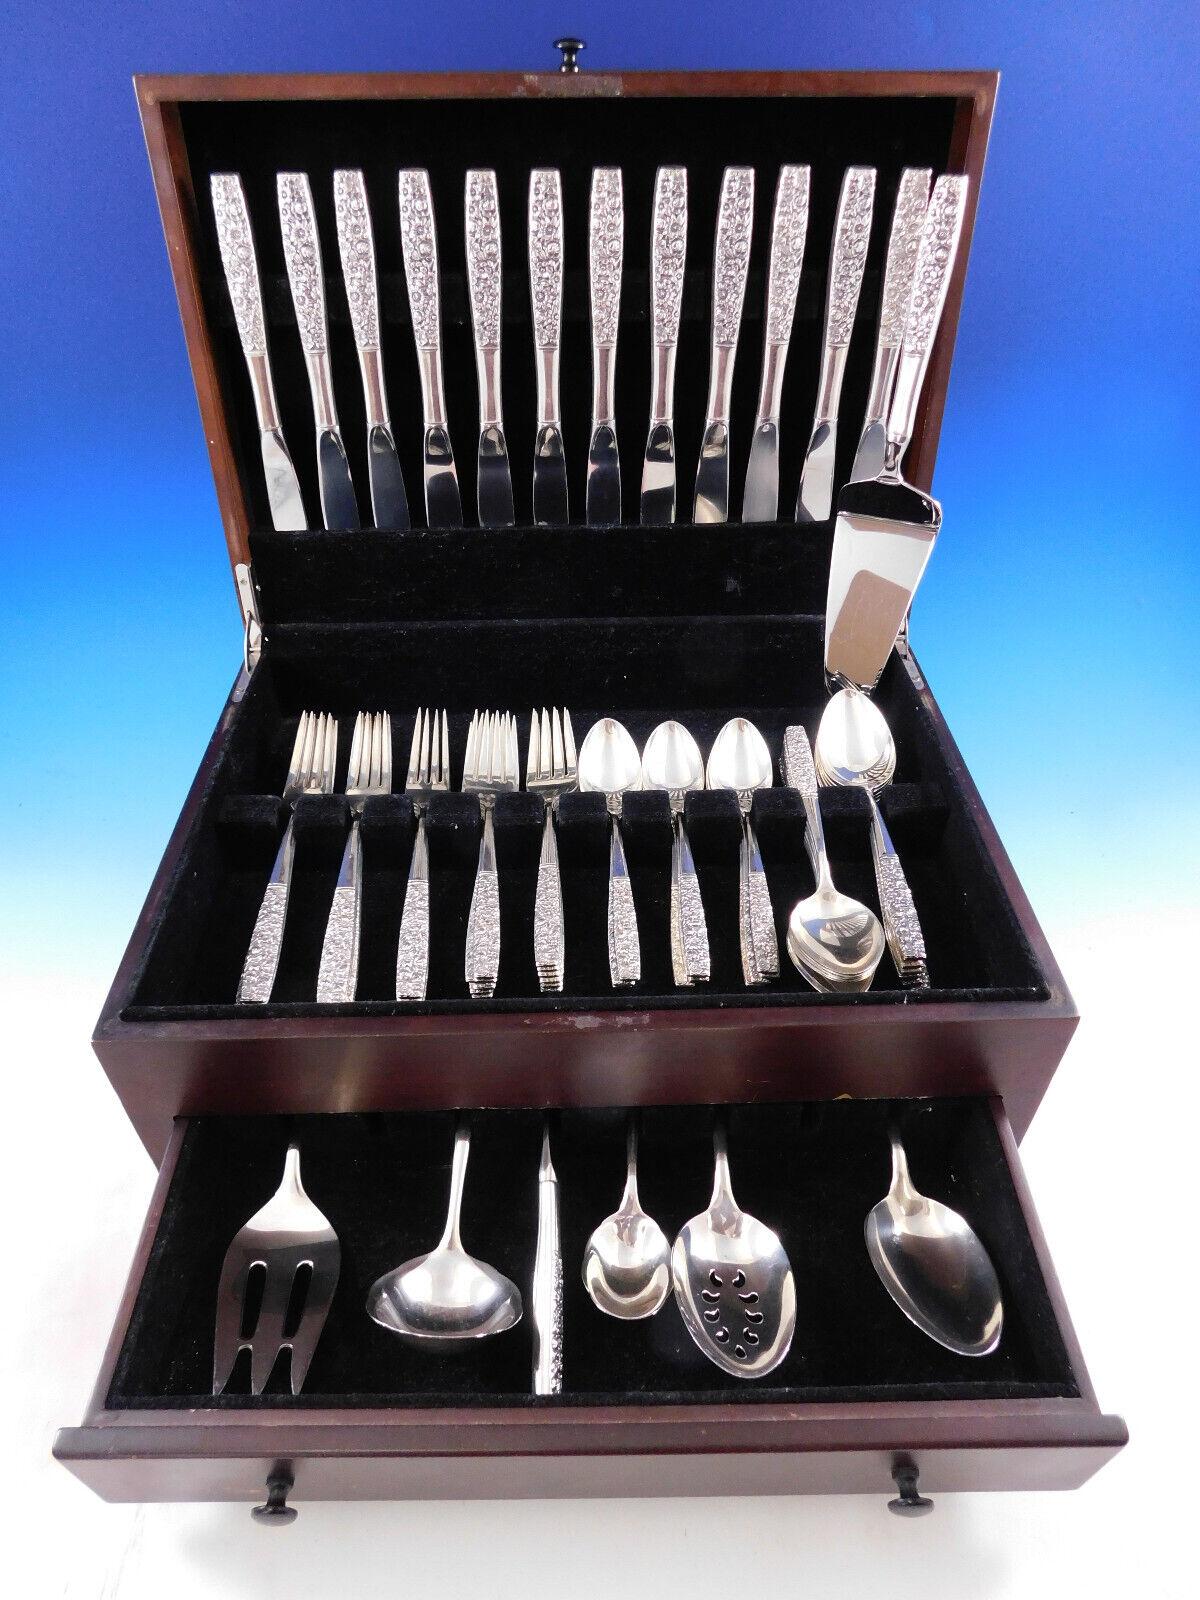 Contessina by Towle, circa 1965, floral repousse sterling silver Flatware set - 67 Pieces. This set includes:

12 Knives, 9